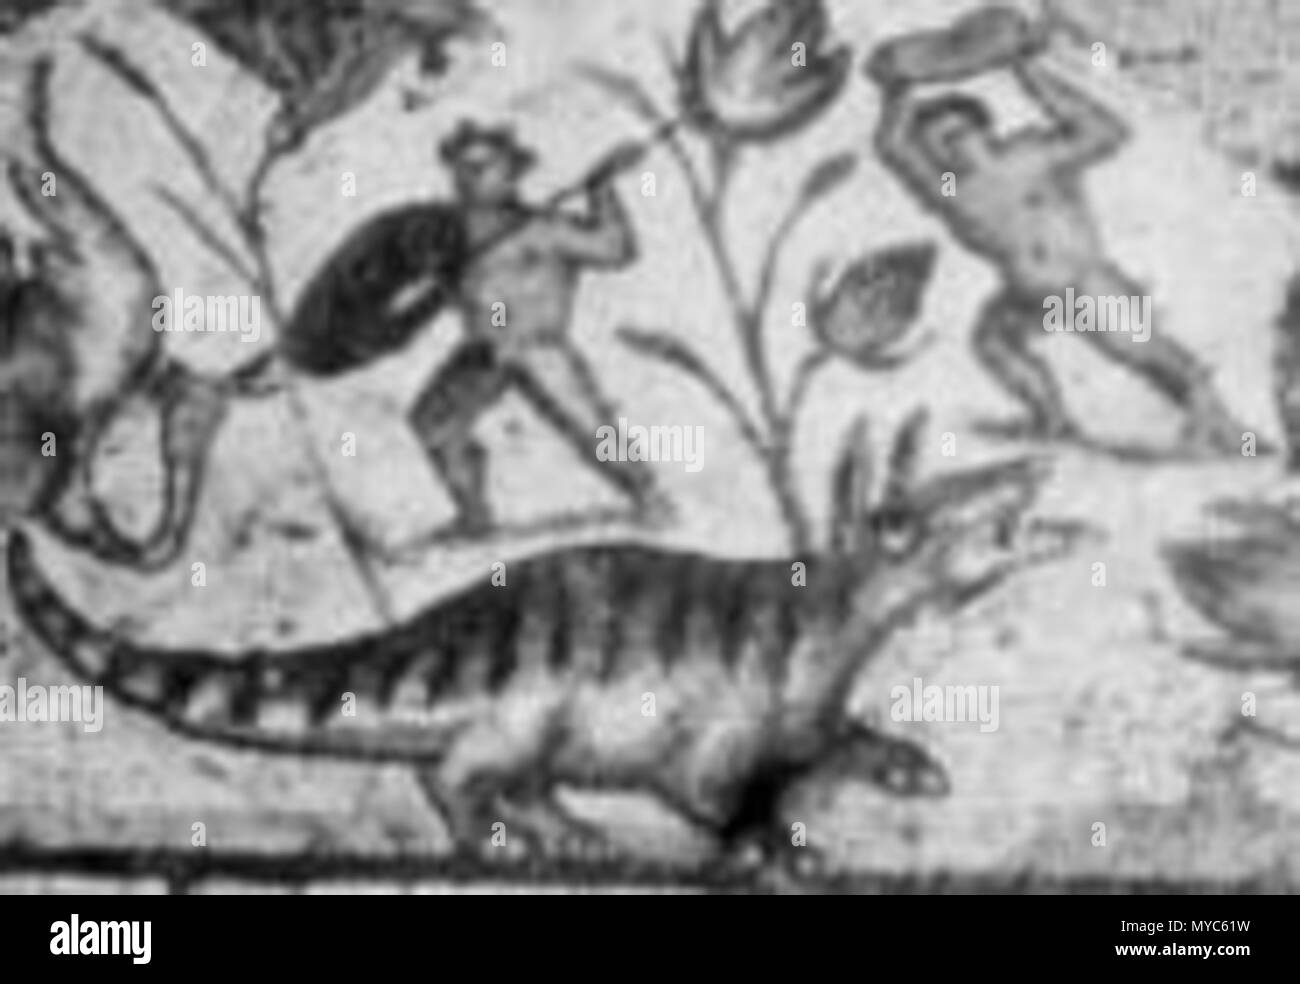 . English: Detail from scene incorporated into the Dionysos Mosaic floor discovered at Sepphoris. The mosaic is dated between the first and third centuries. A great earthquake destroyed Sepphoris in 363 A.D. 1994. Netzer and Weiss 138 Detail mosaic Sepphoris Stock Photo